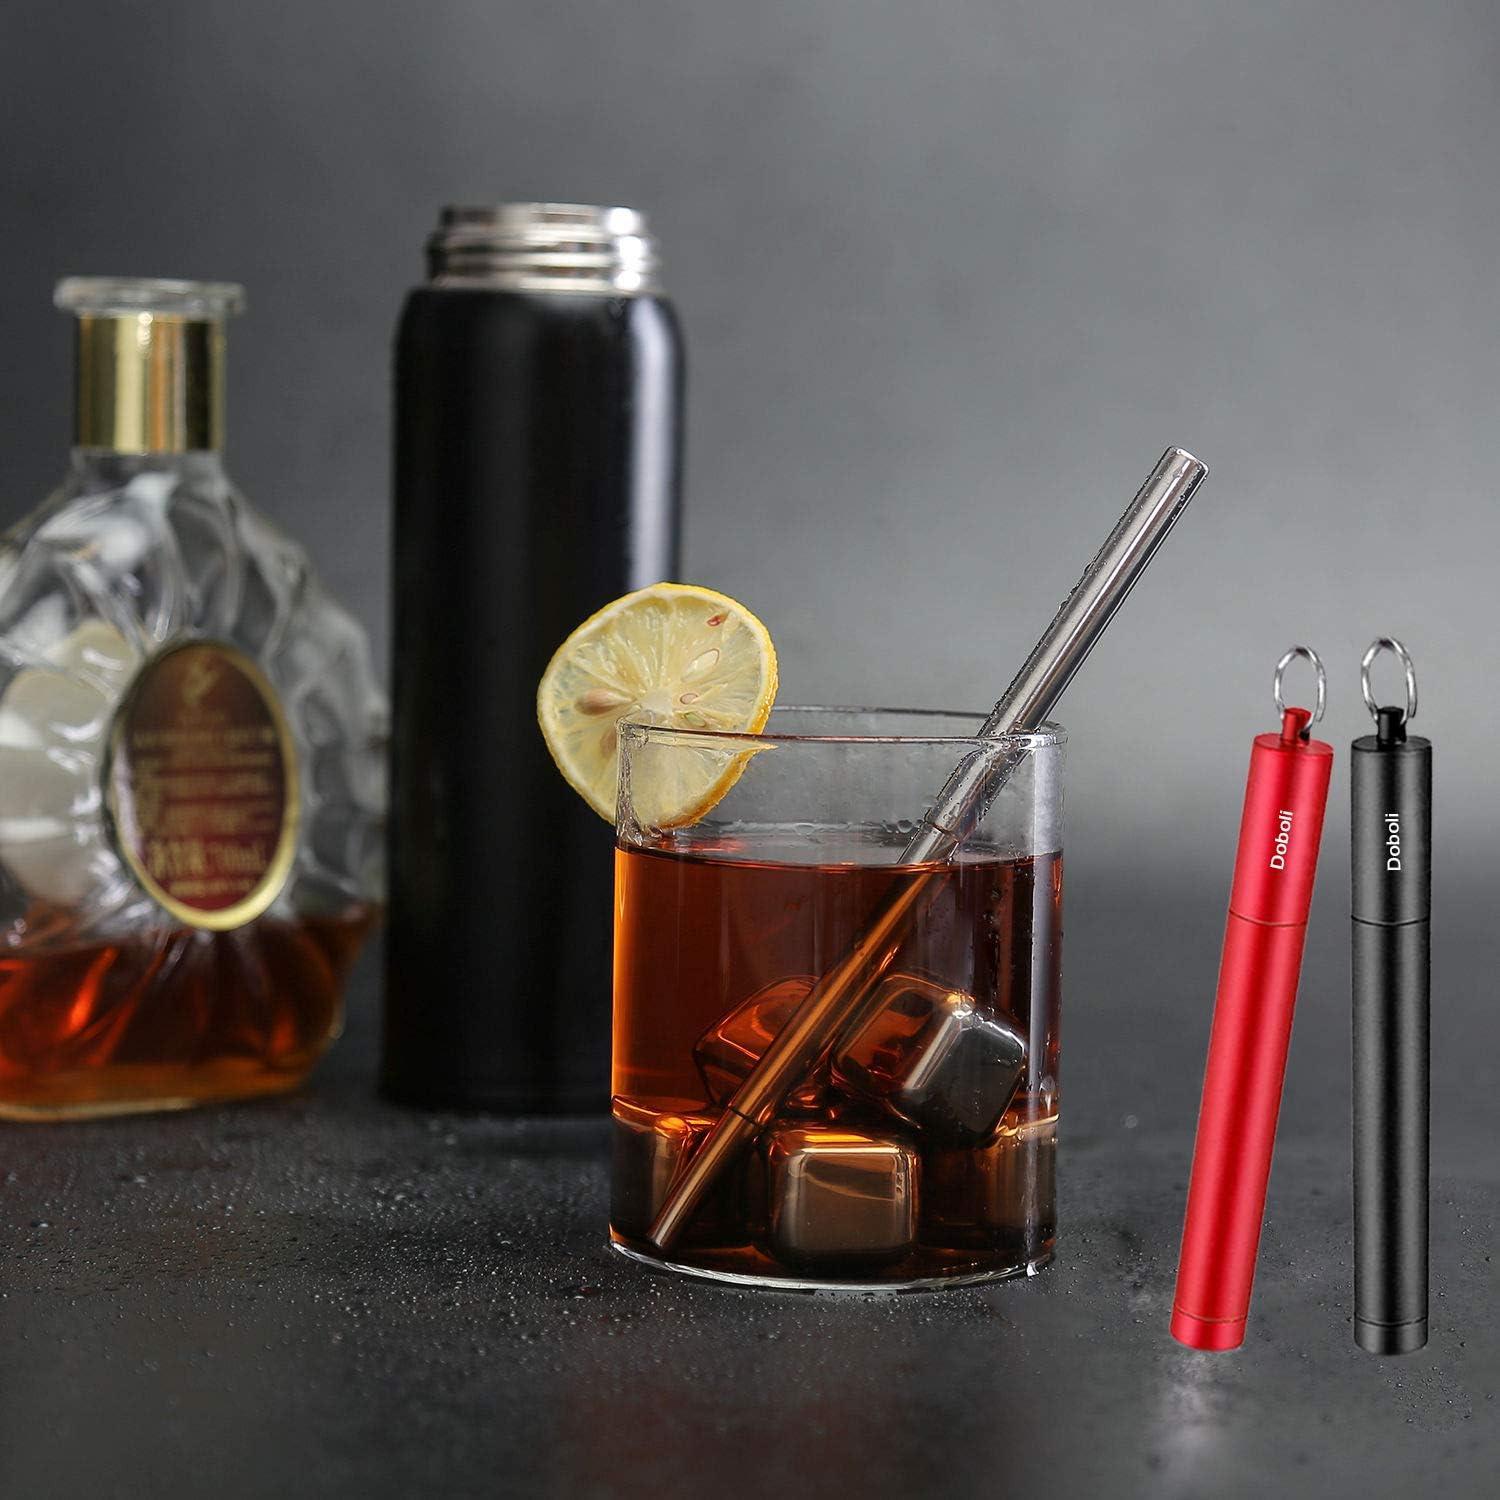 Telescopic Stainless Steel Drink Straw